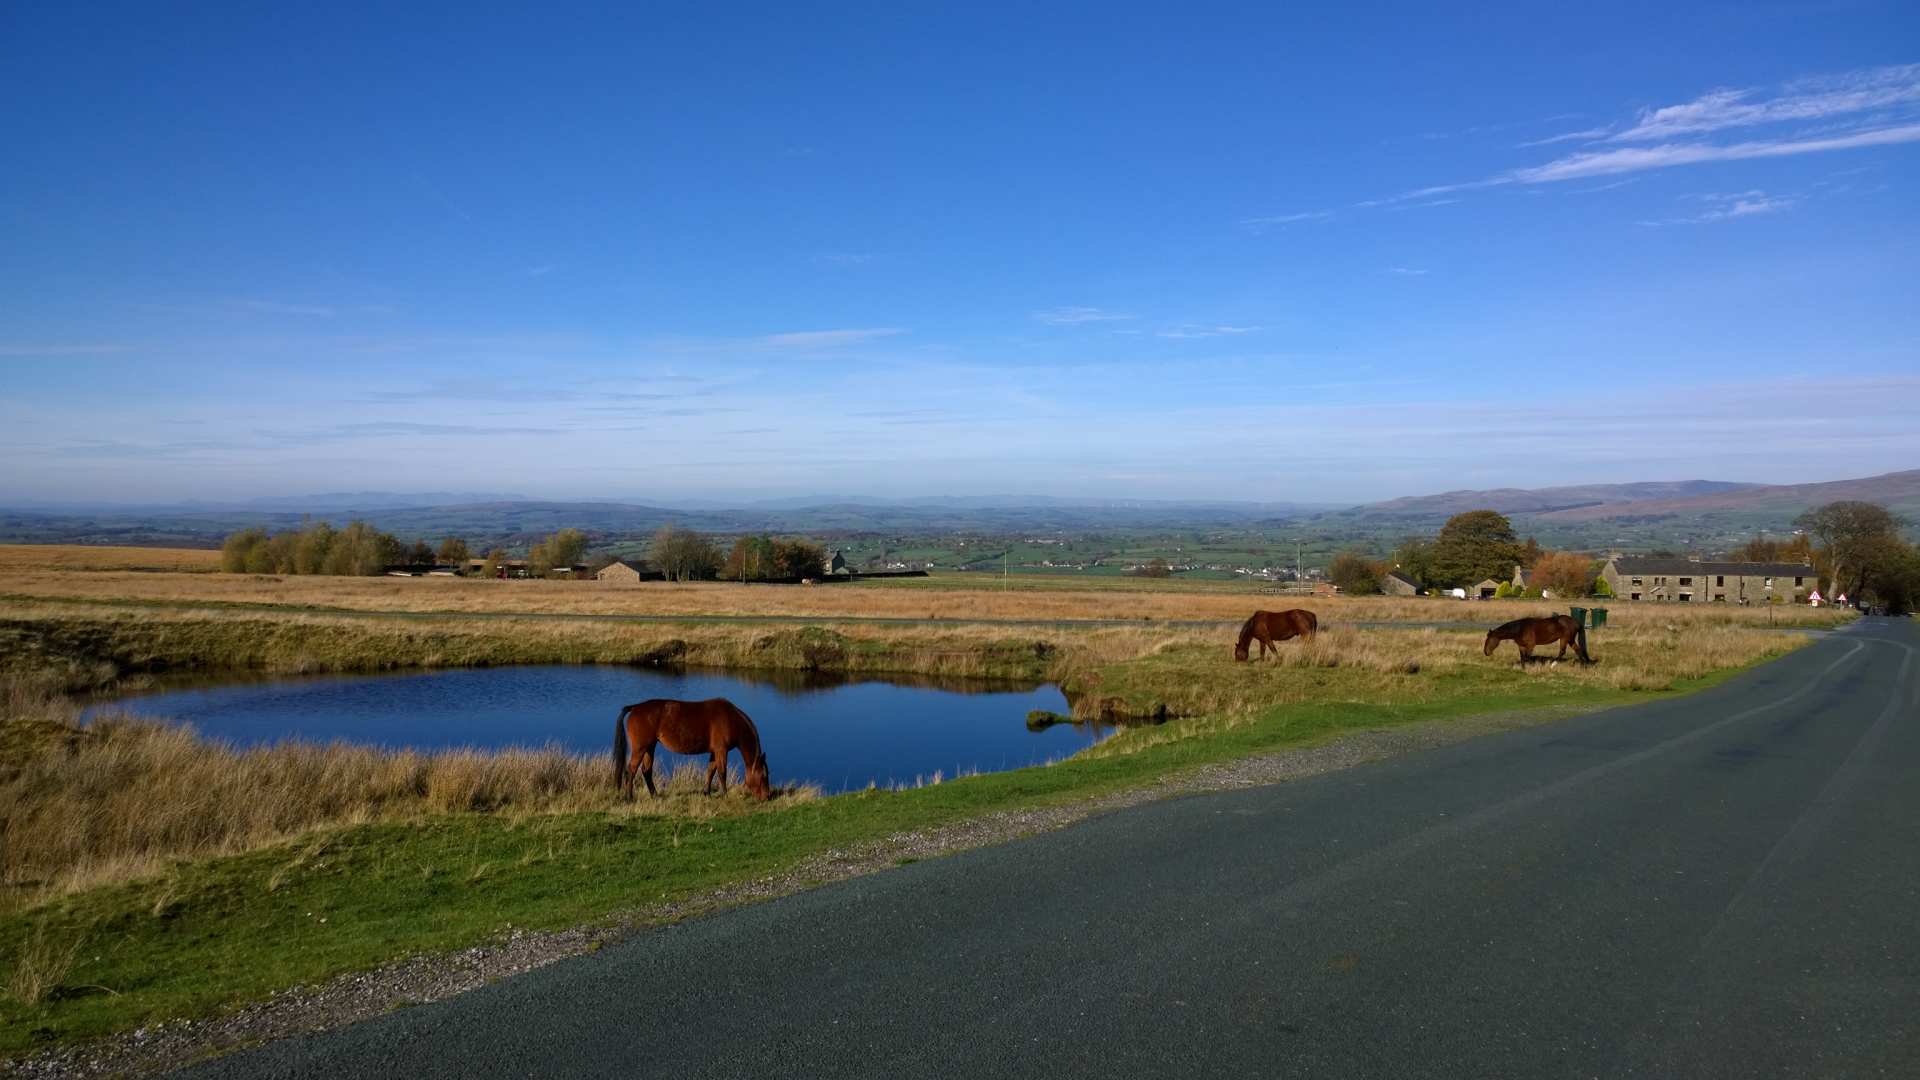 Horses meander across the road near Fourstones. - Horses meander across the road near Fourstones.